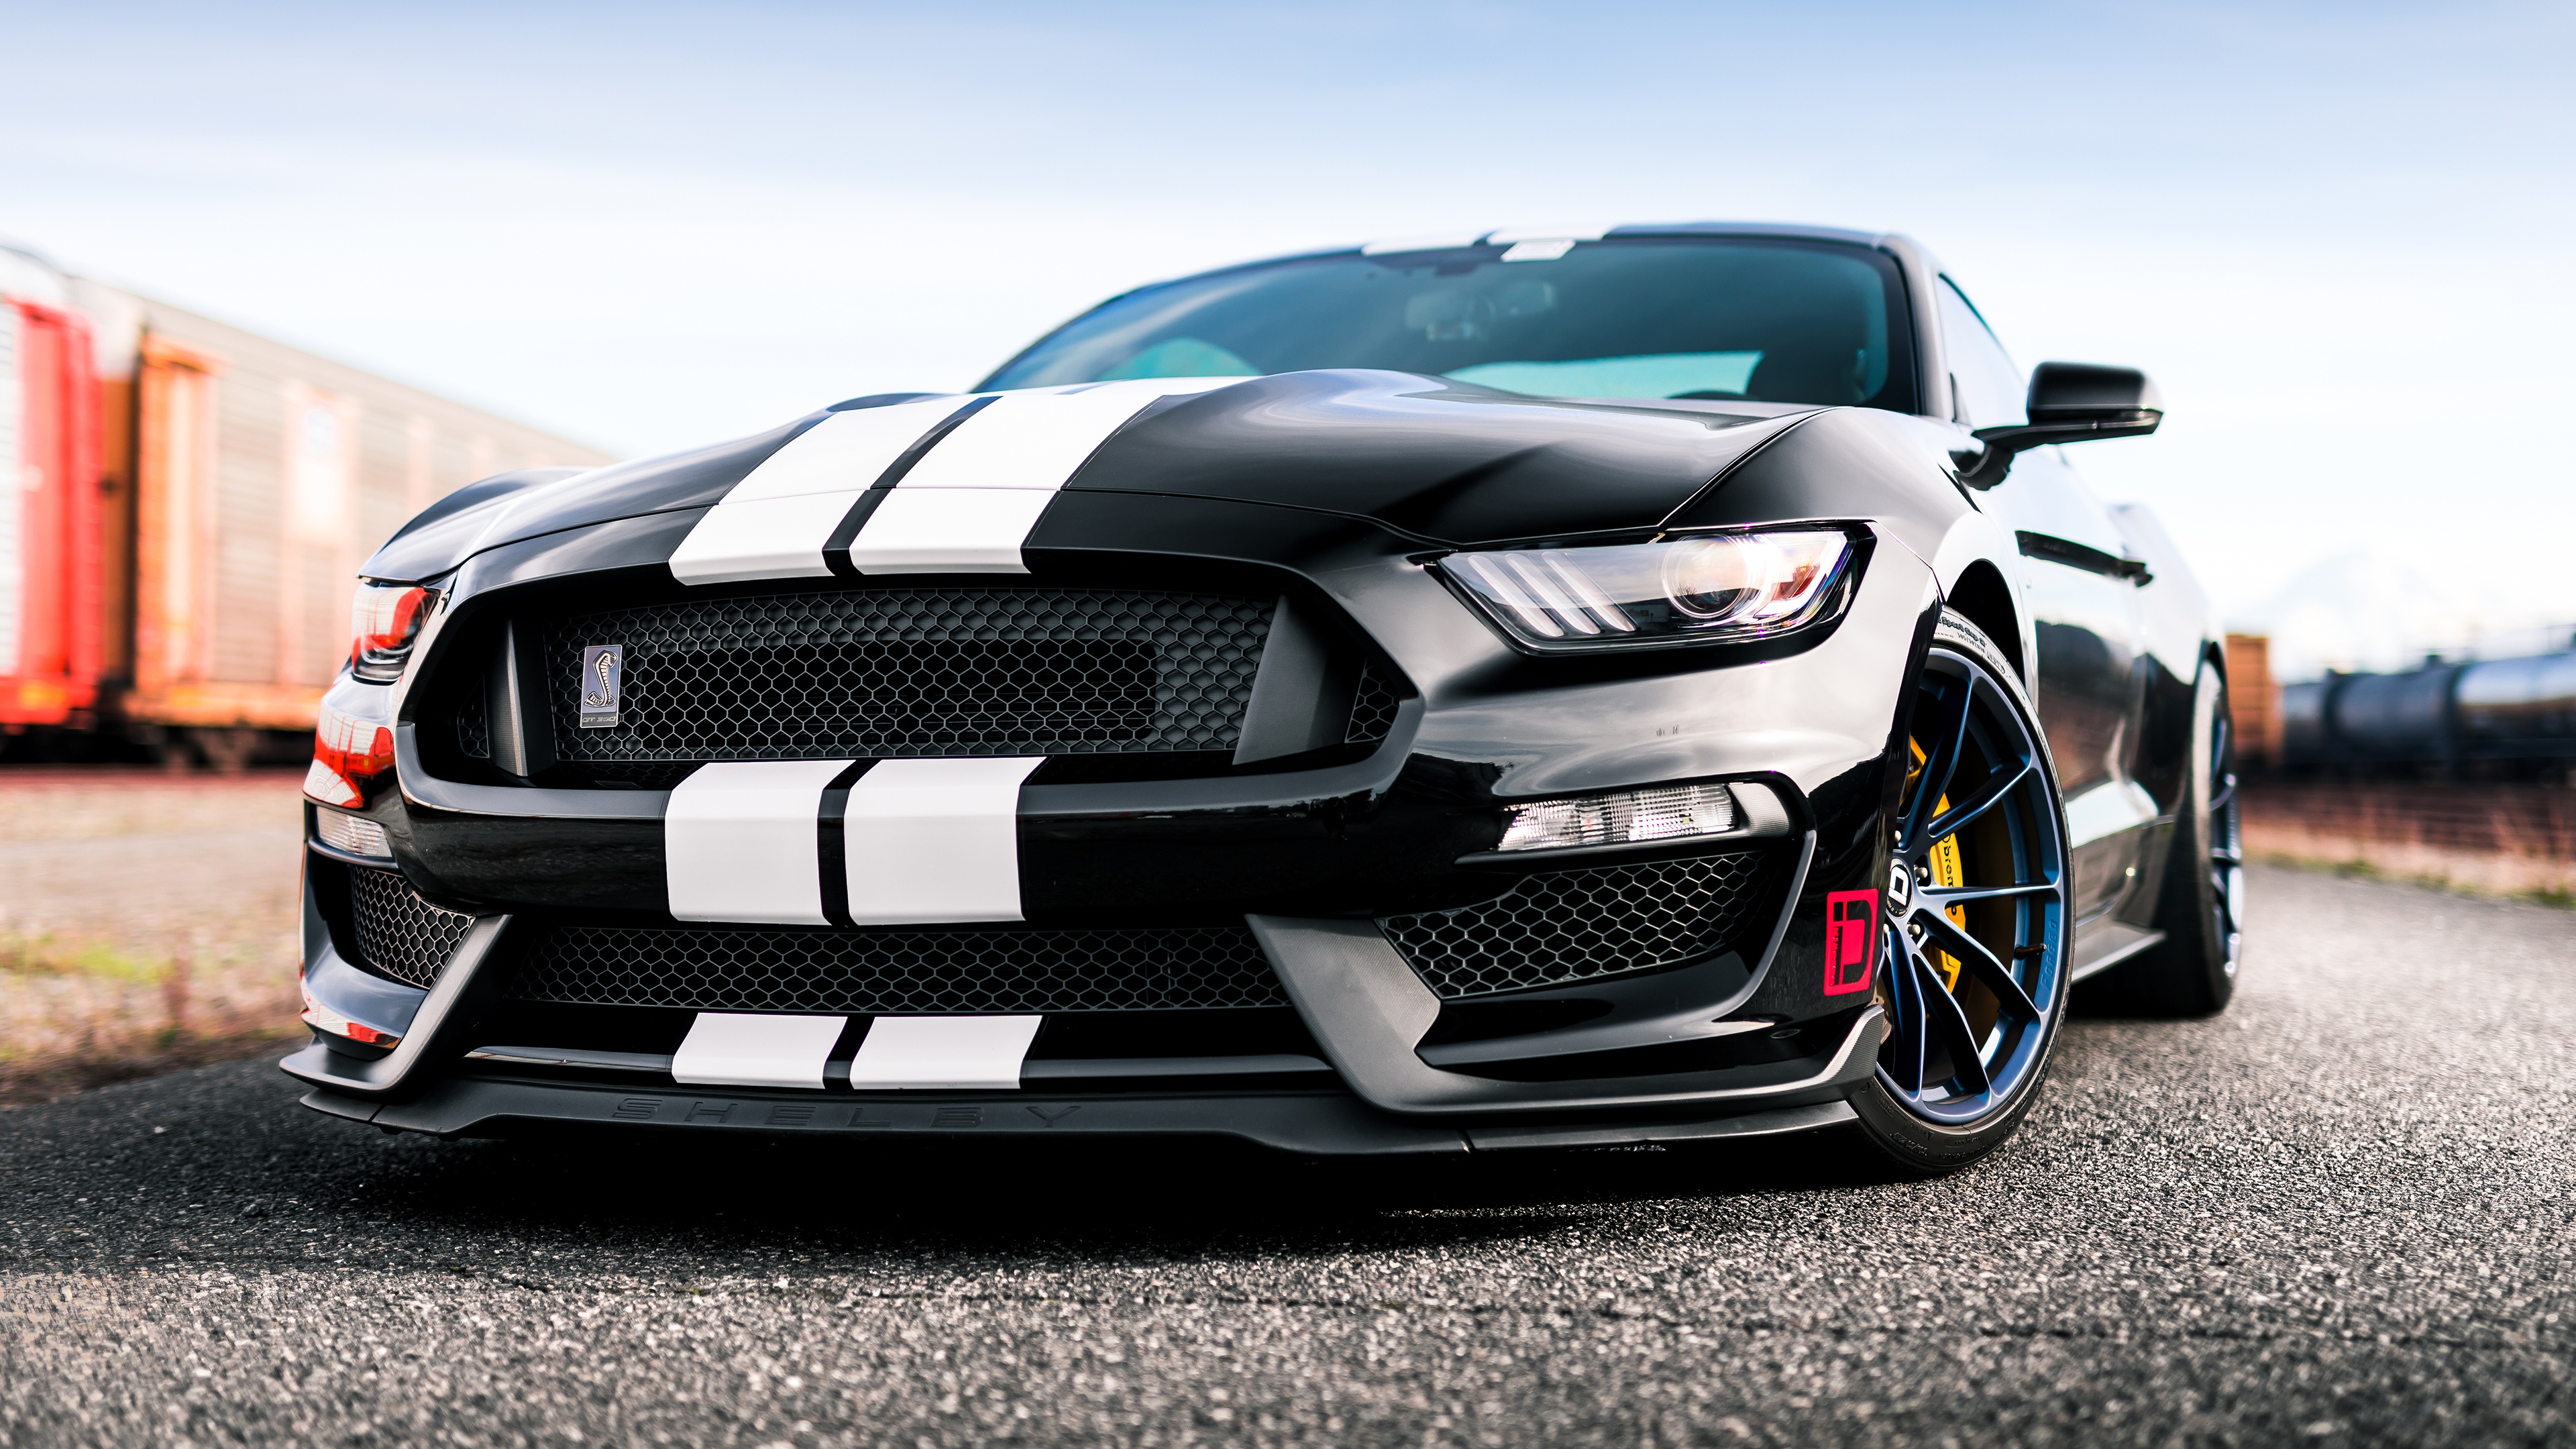 Shelby Mustang Gt 350 Wallpapers.